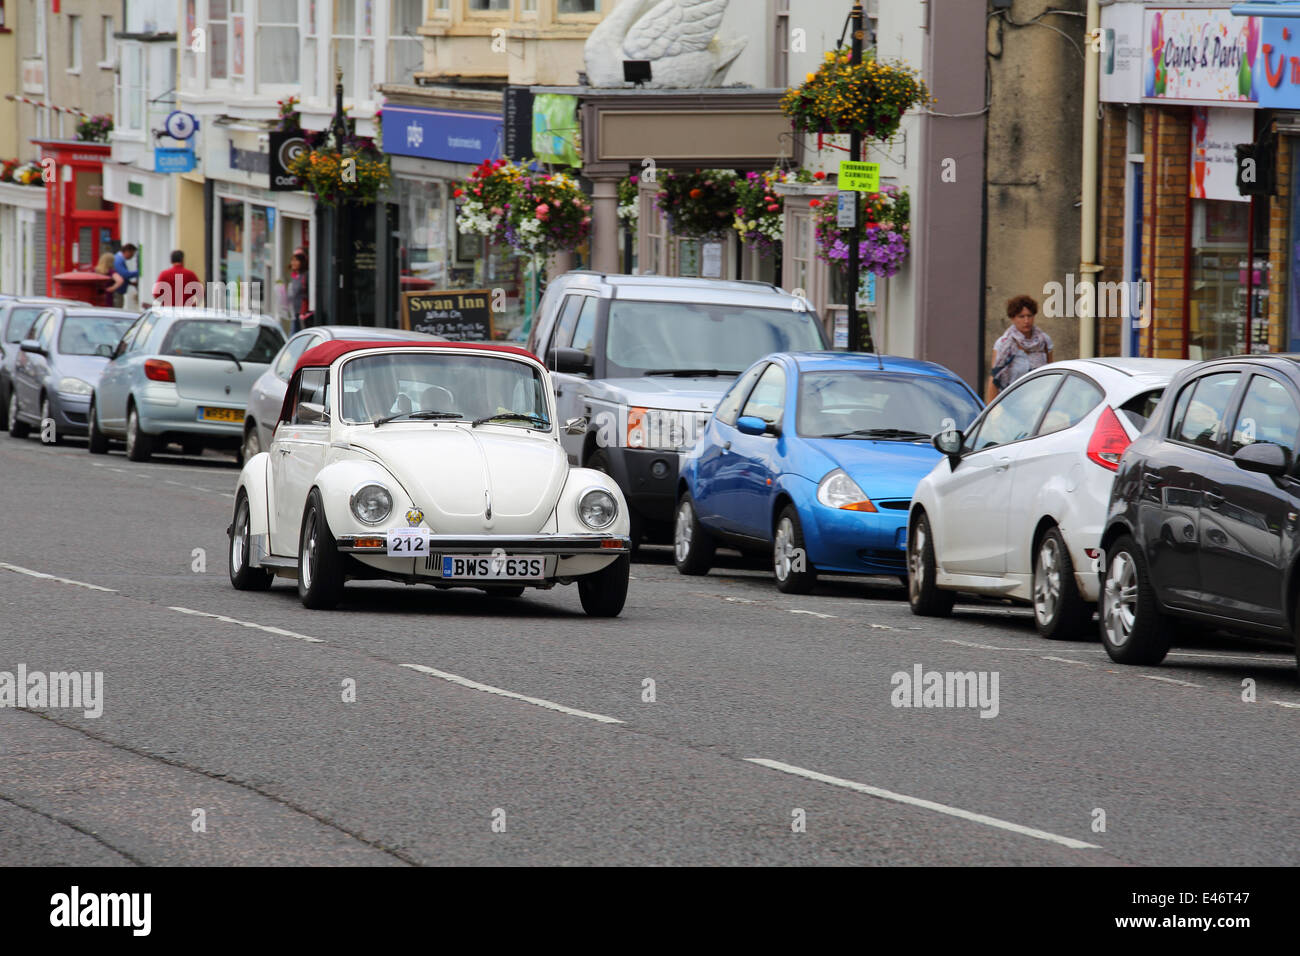 Classic Cars and Bikes driving through Thornbury Town taking part in Chipping Sodbury's Classic Run. Stock Photo